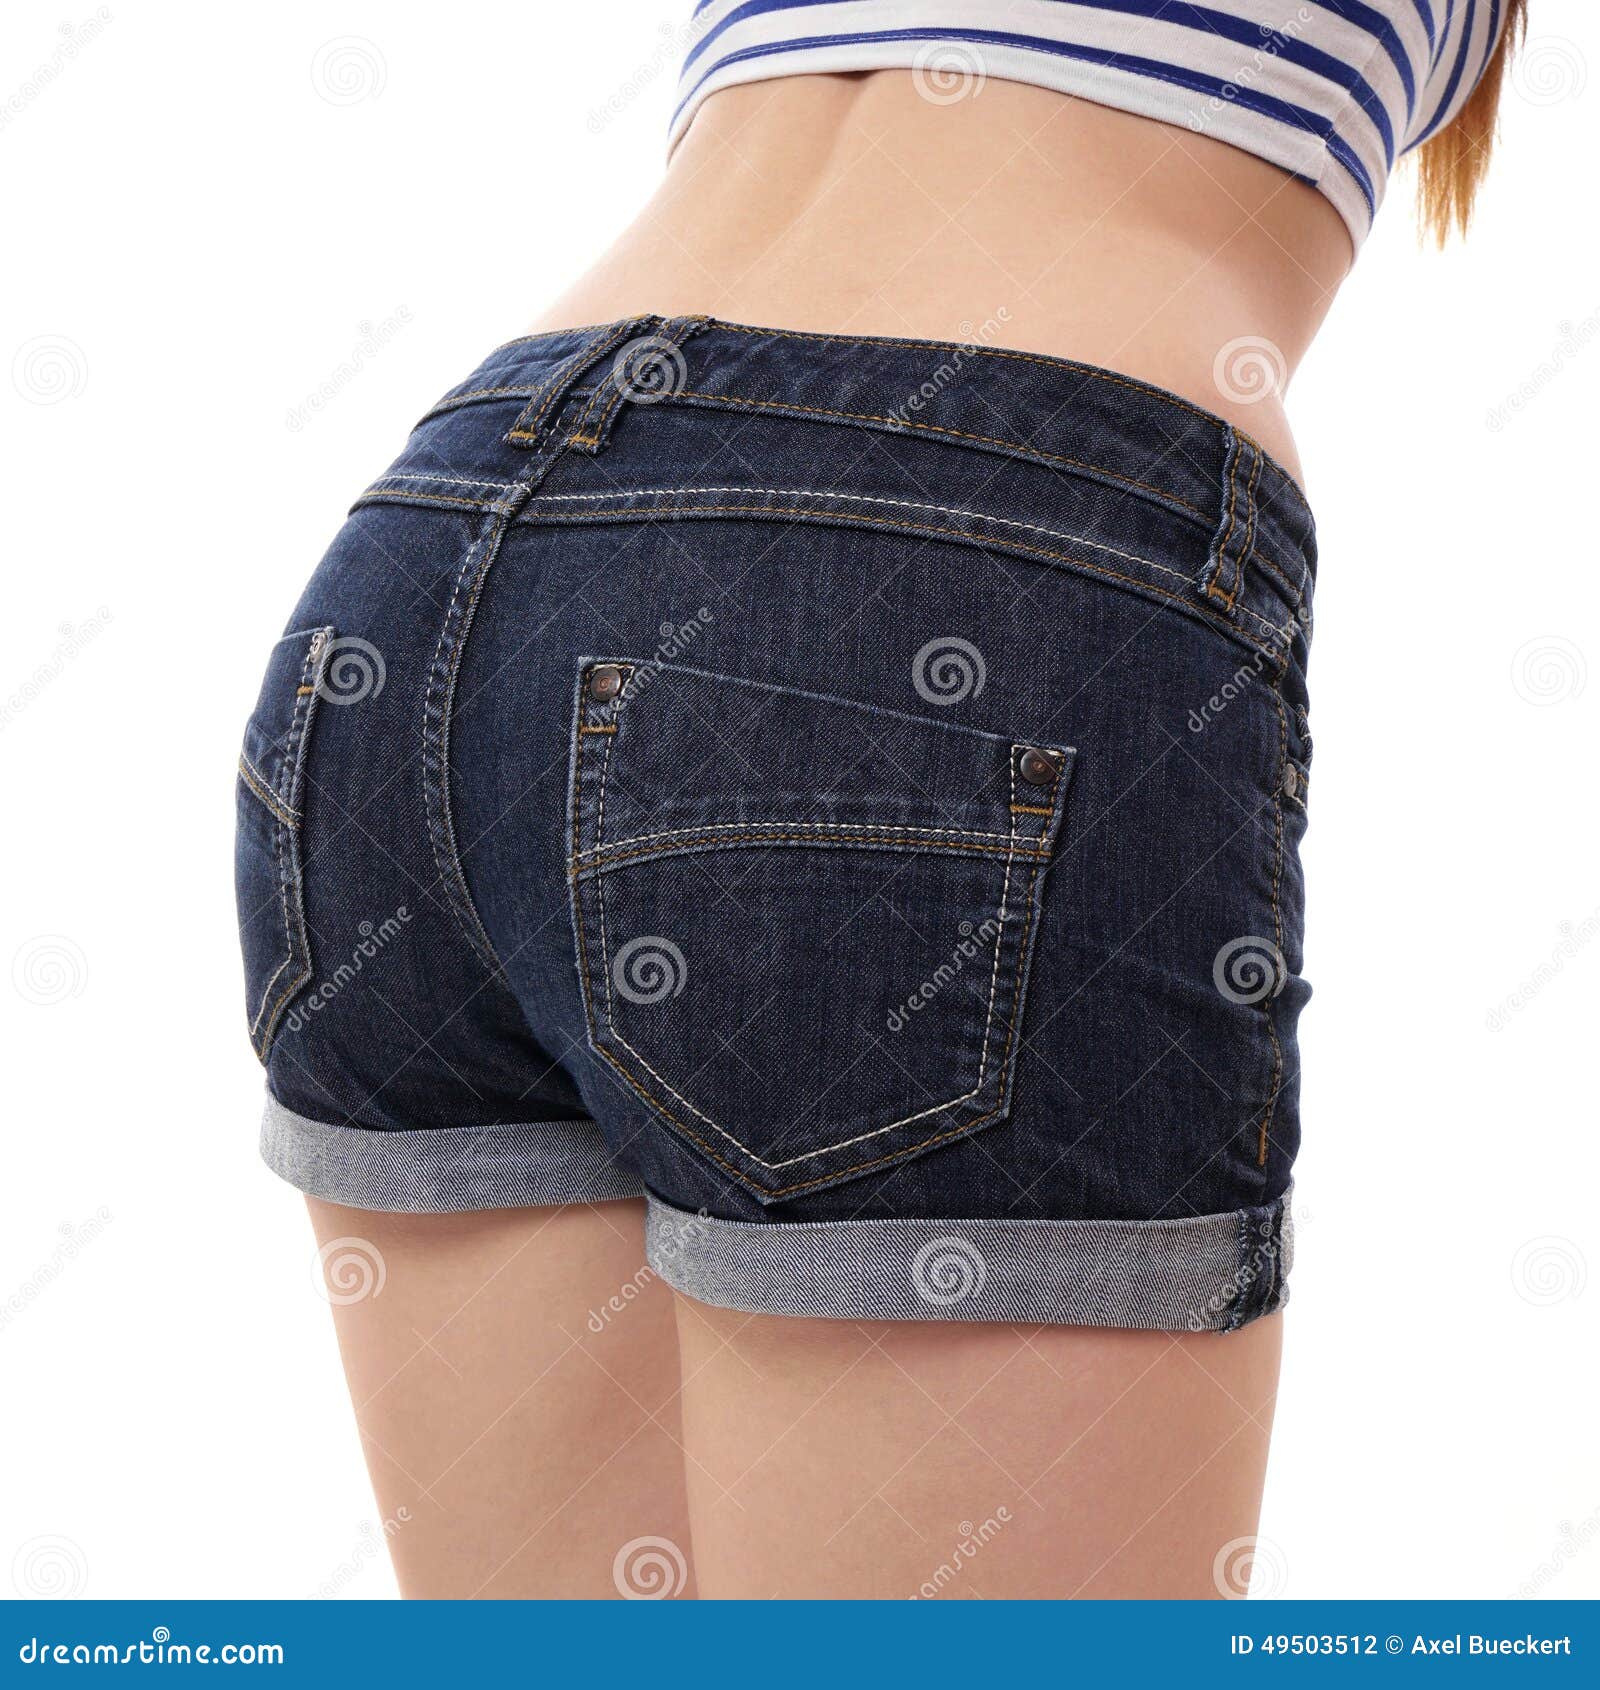 Hot Pants or Booty Shorts Fashion Trend Stock Photo - Image of attractive,  female: 97948248